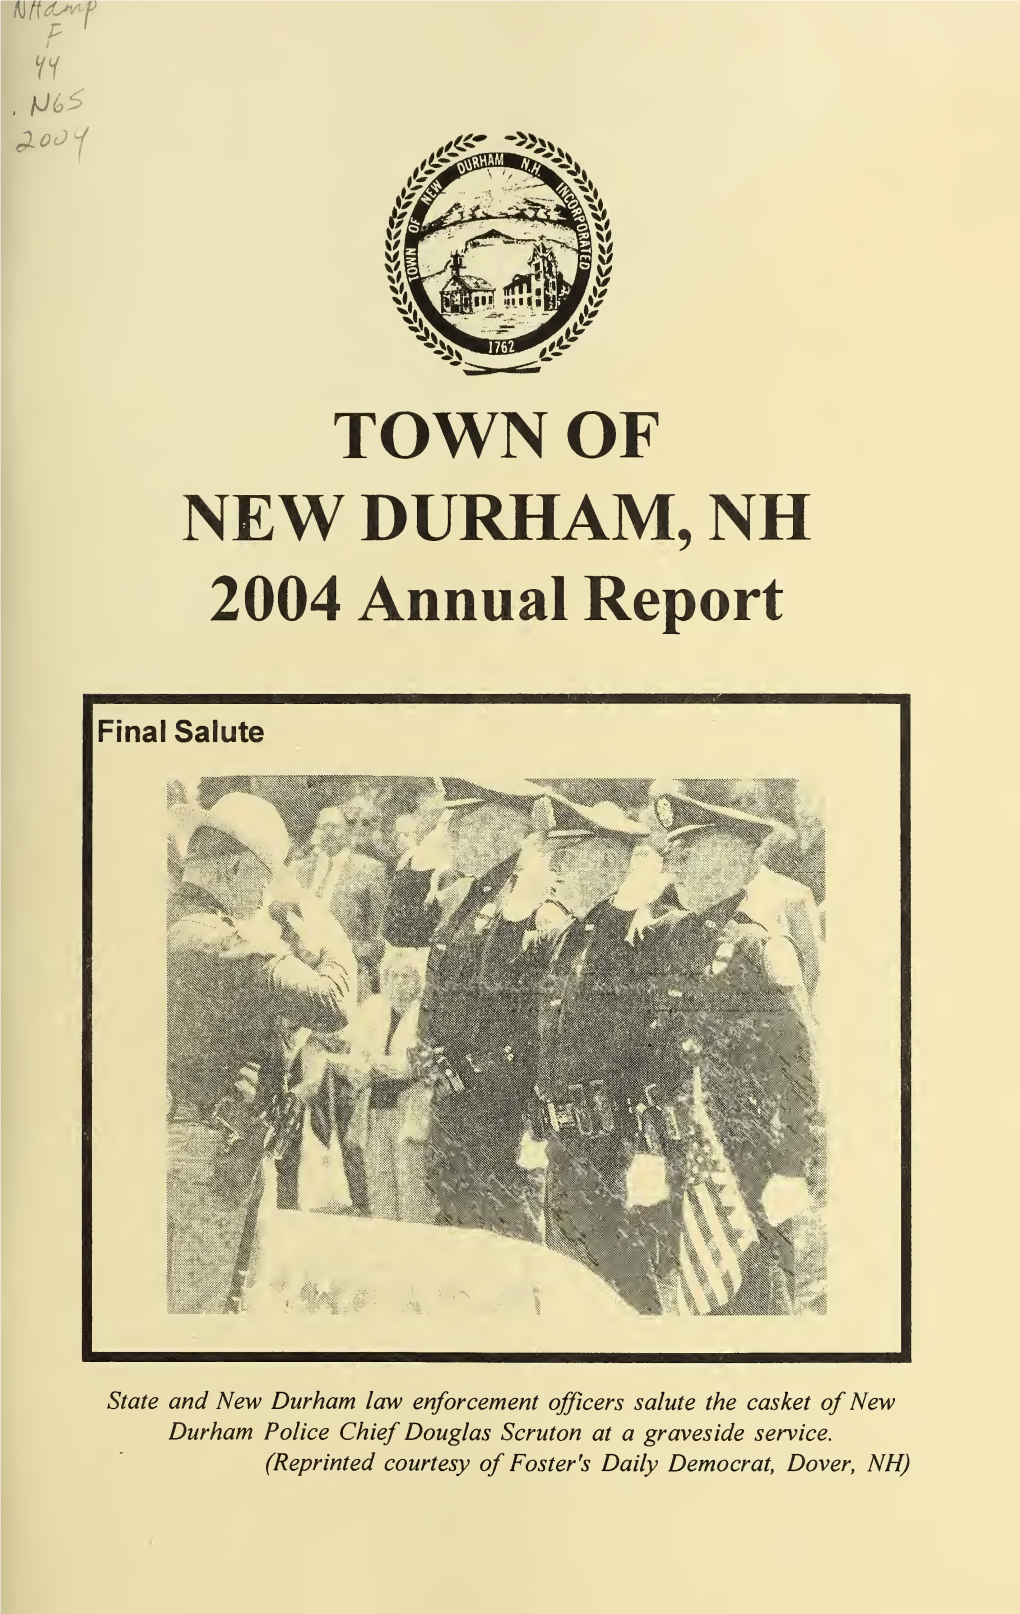 Annual Report of the Town of New Durham, New Hampshire